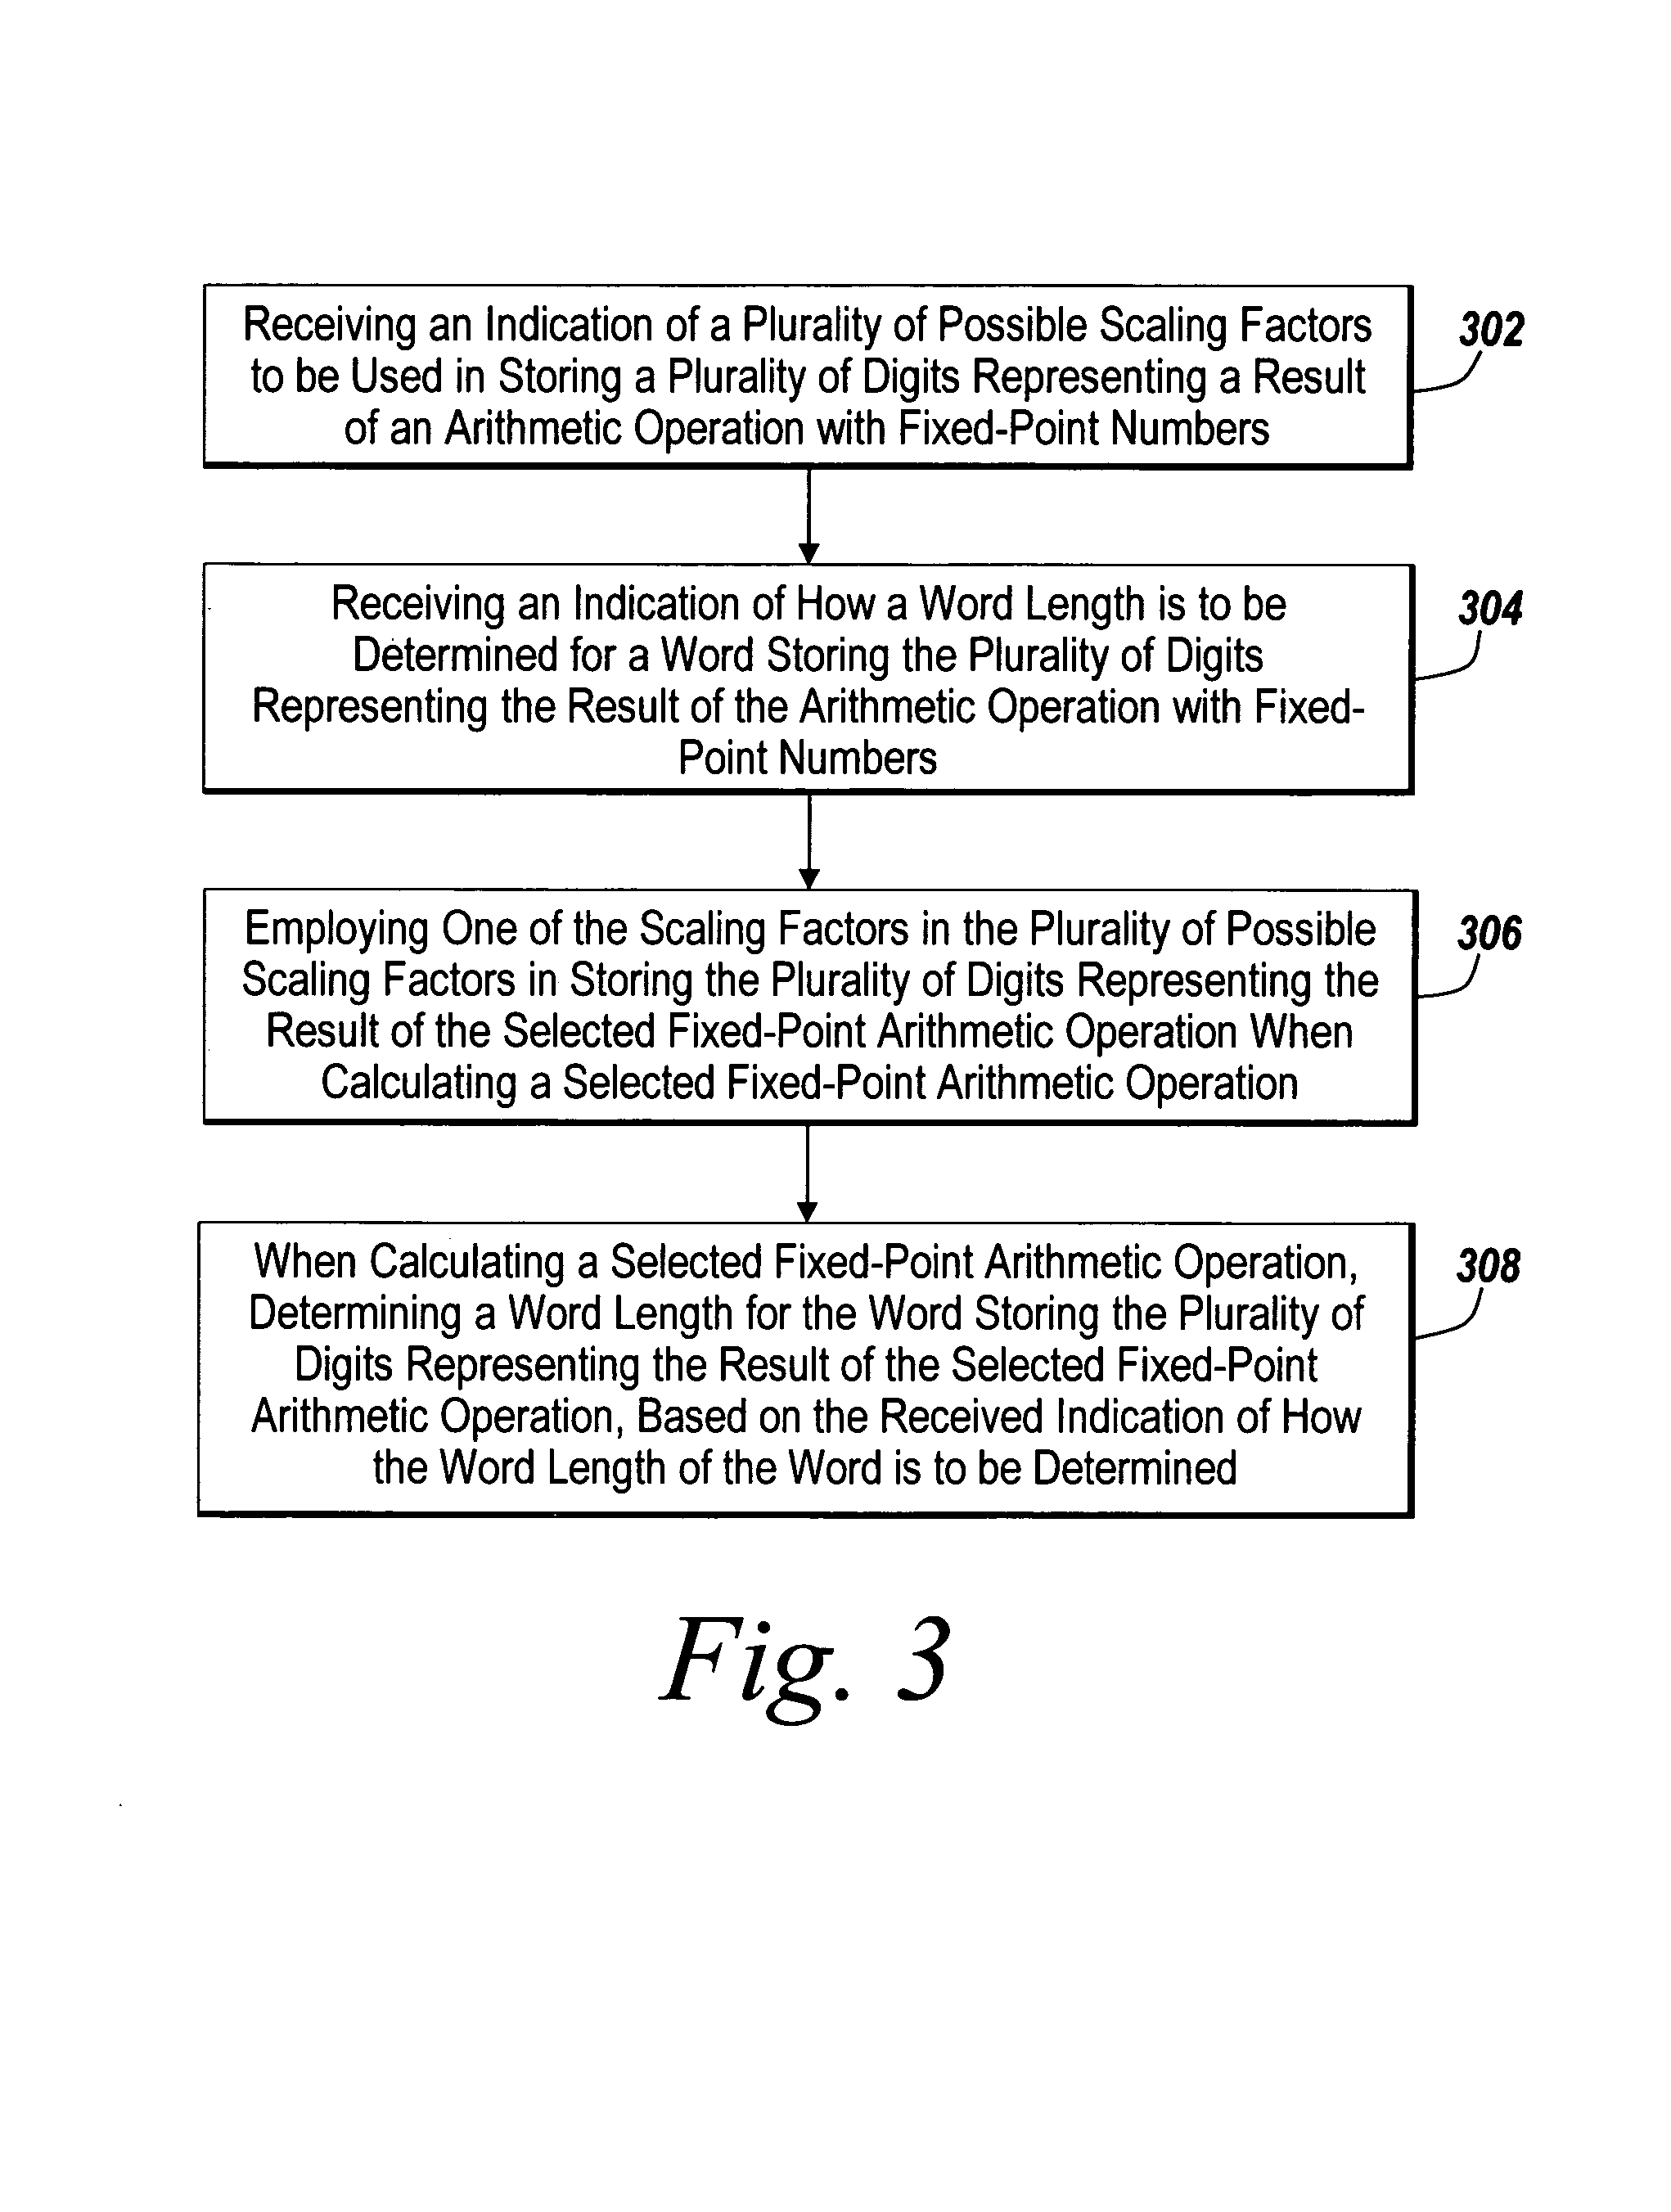 System and methods for determining attributes for arithmetic operations with fixed-point numbers